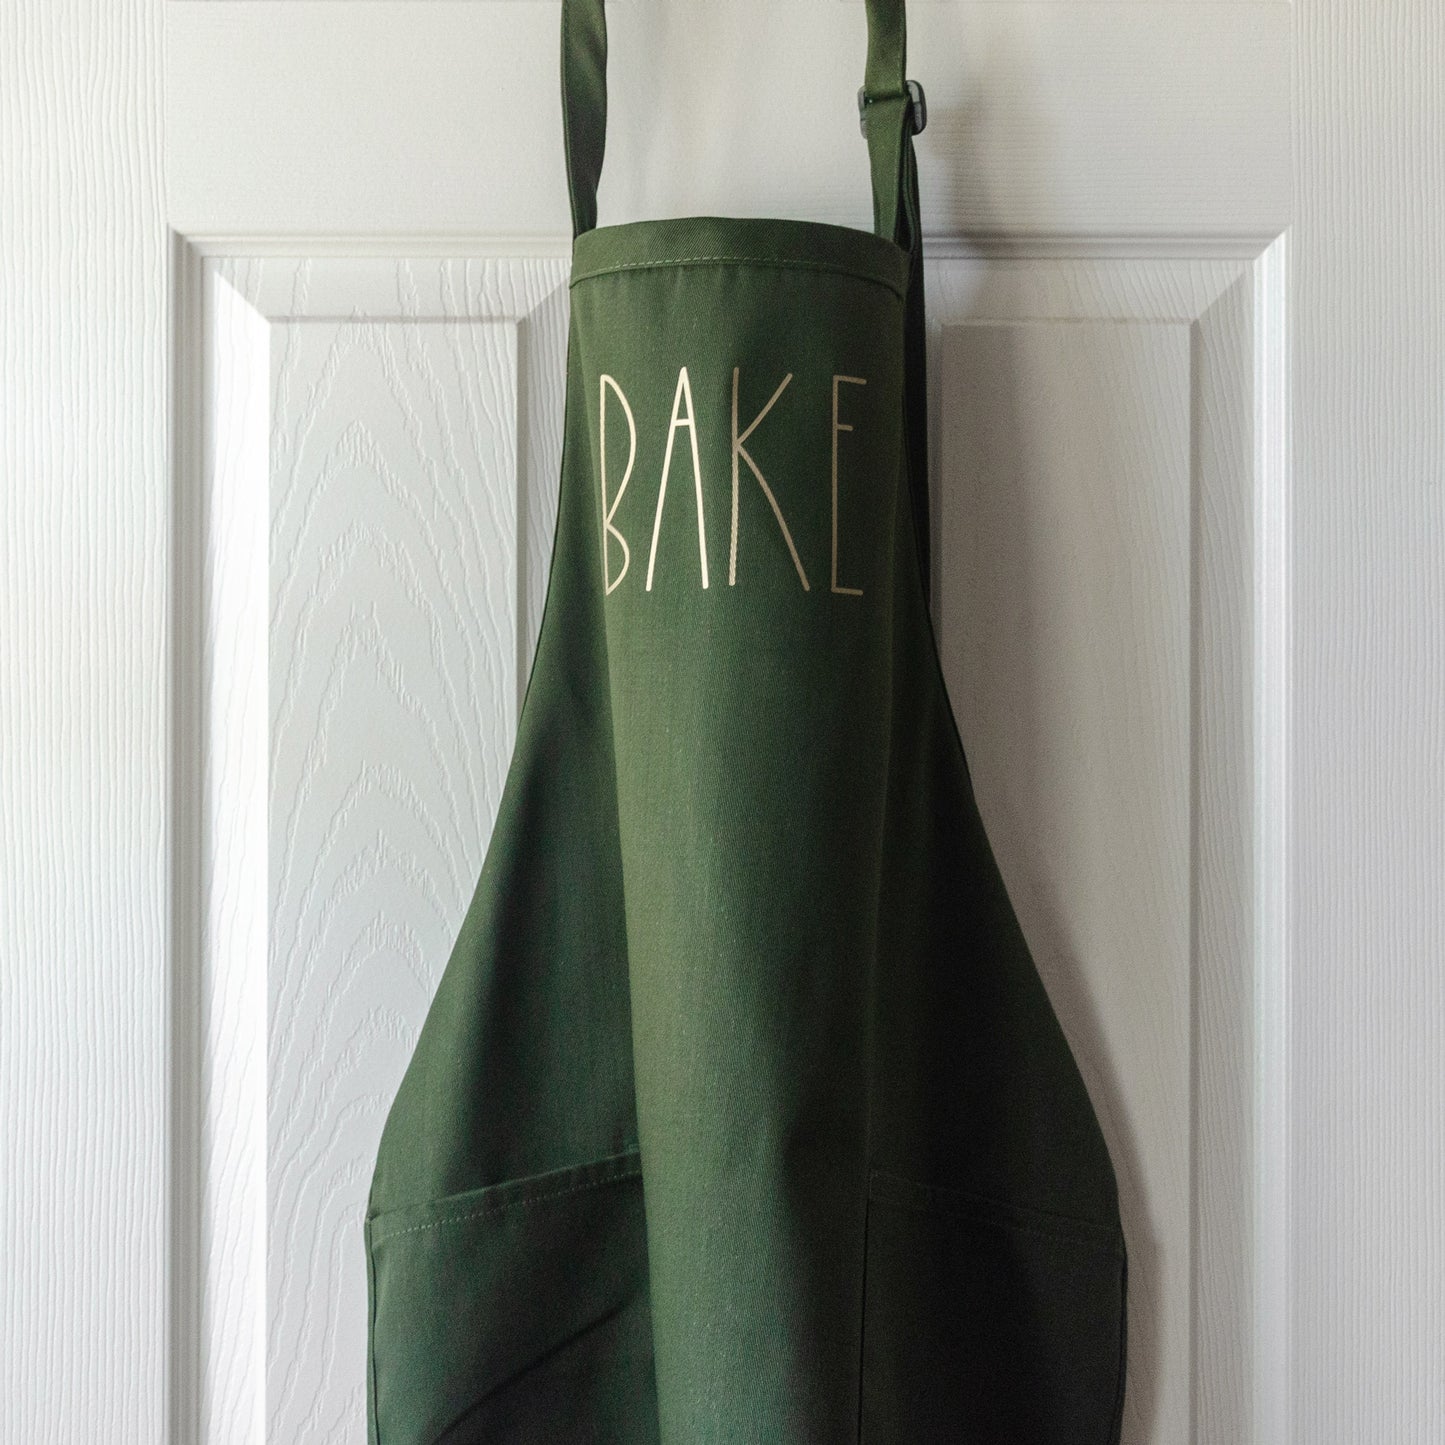 a Bake apron in green